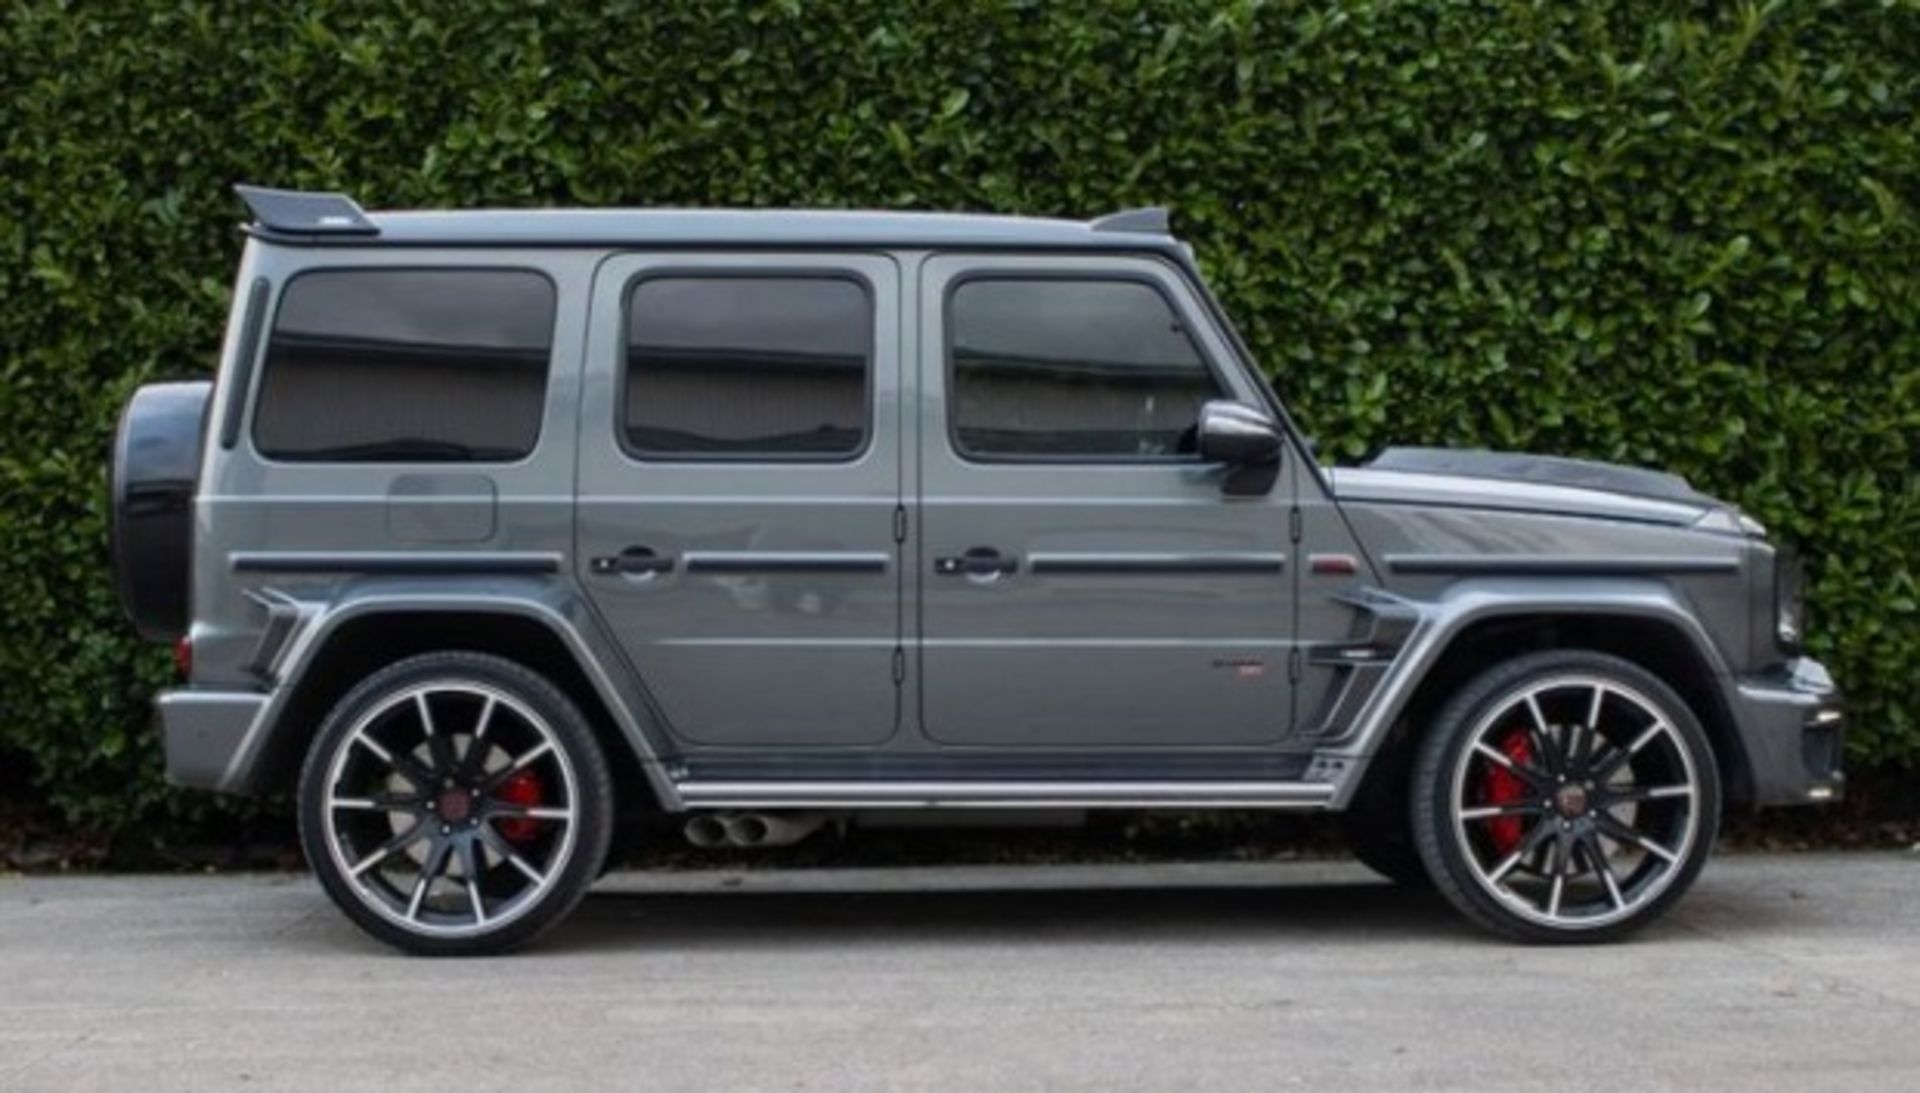 MERCEDES G63 BRABUS WIDE-STAR 800 STYLING GREY WITH BLACK LEATHER INTERIOR - Image 5 of 27